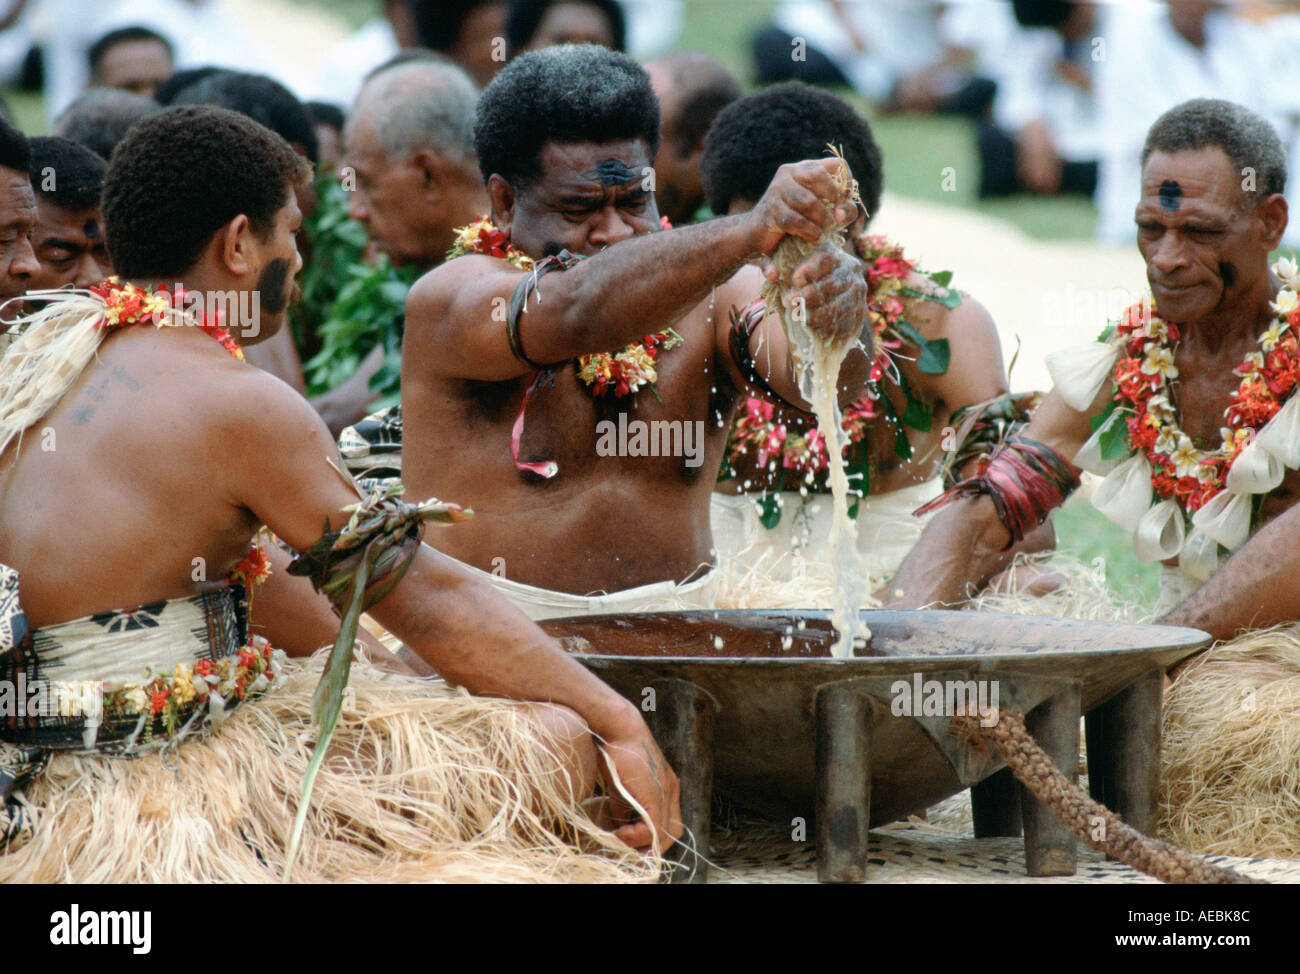 Preparing traditional Kava drink at ceremony Fiji South Pacific Stock Photo